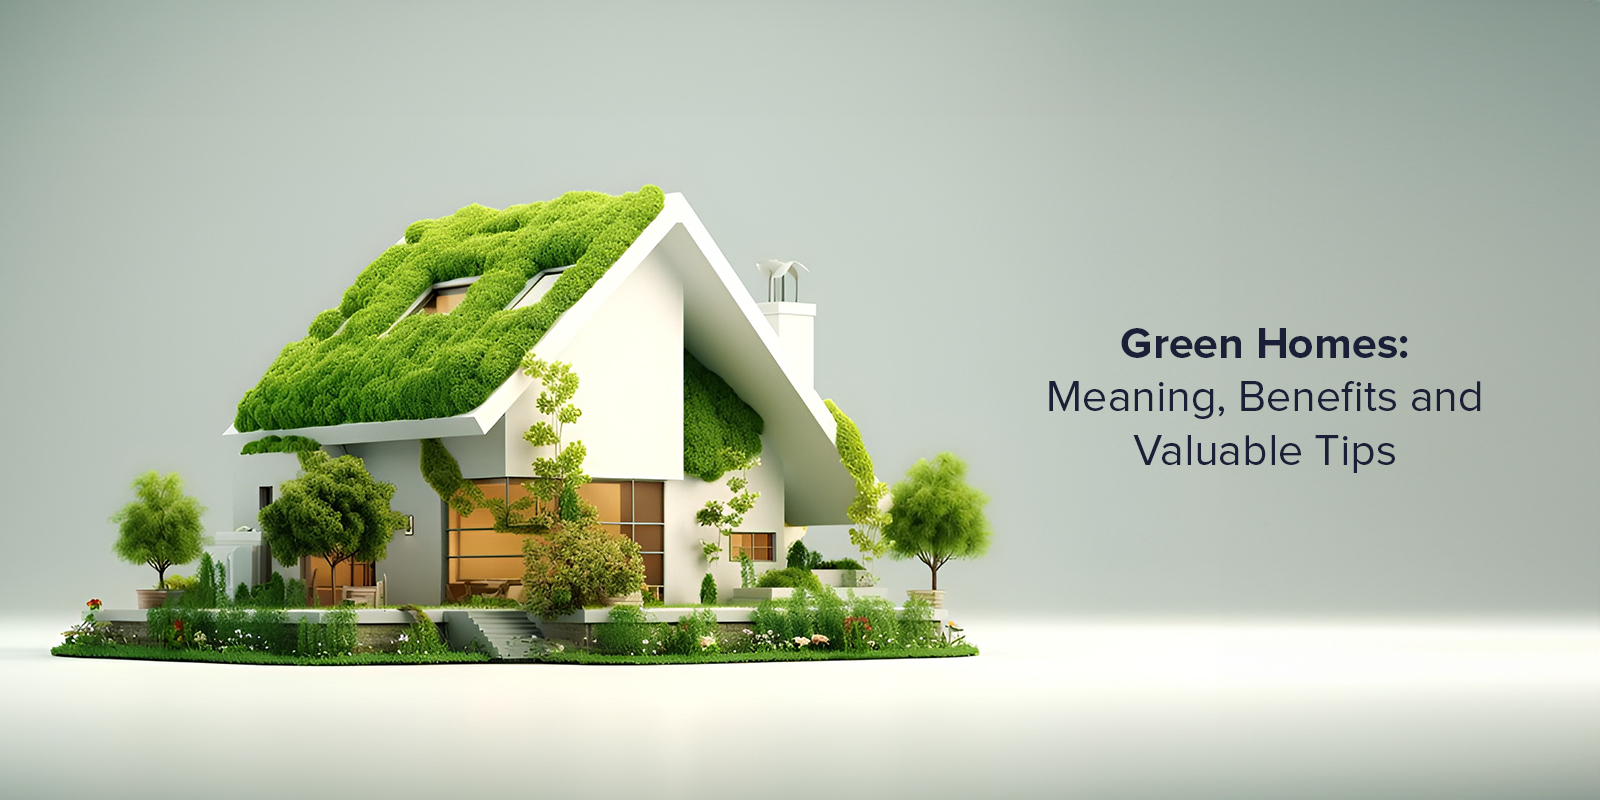 Green Homes: Meaning, Benefits and Valuable Tips